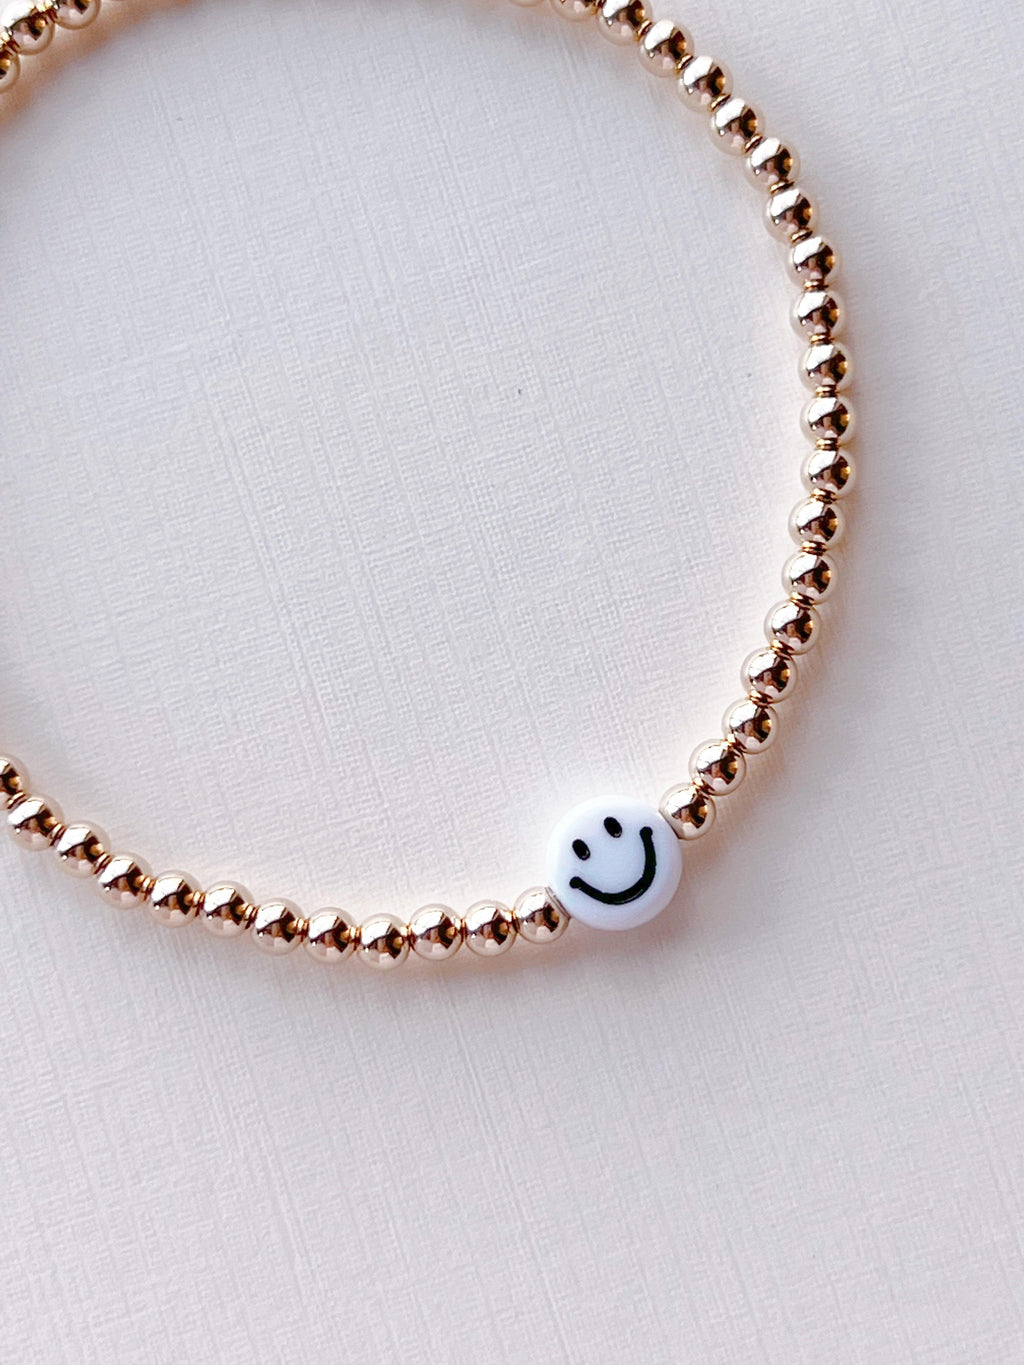 Be Happy Gold Filled Bracelet Smiley Bead Accent - The Neon Cactus Studio